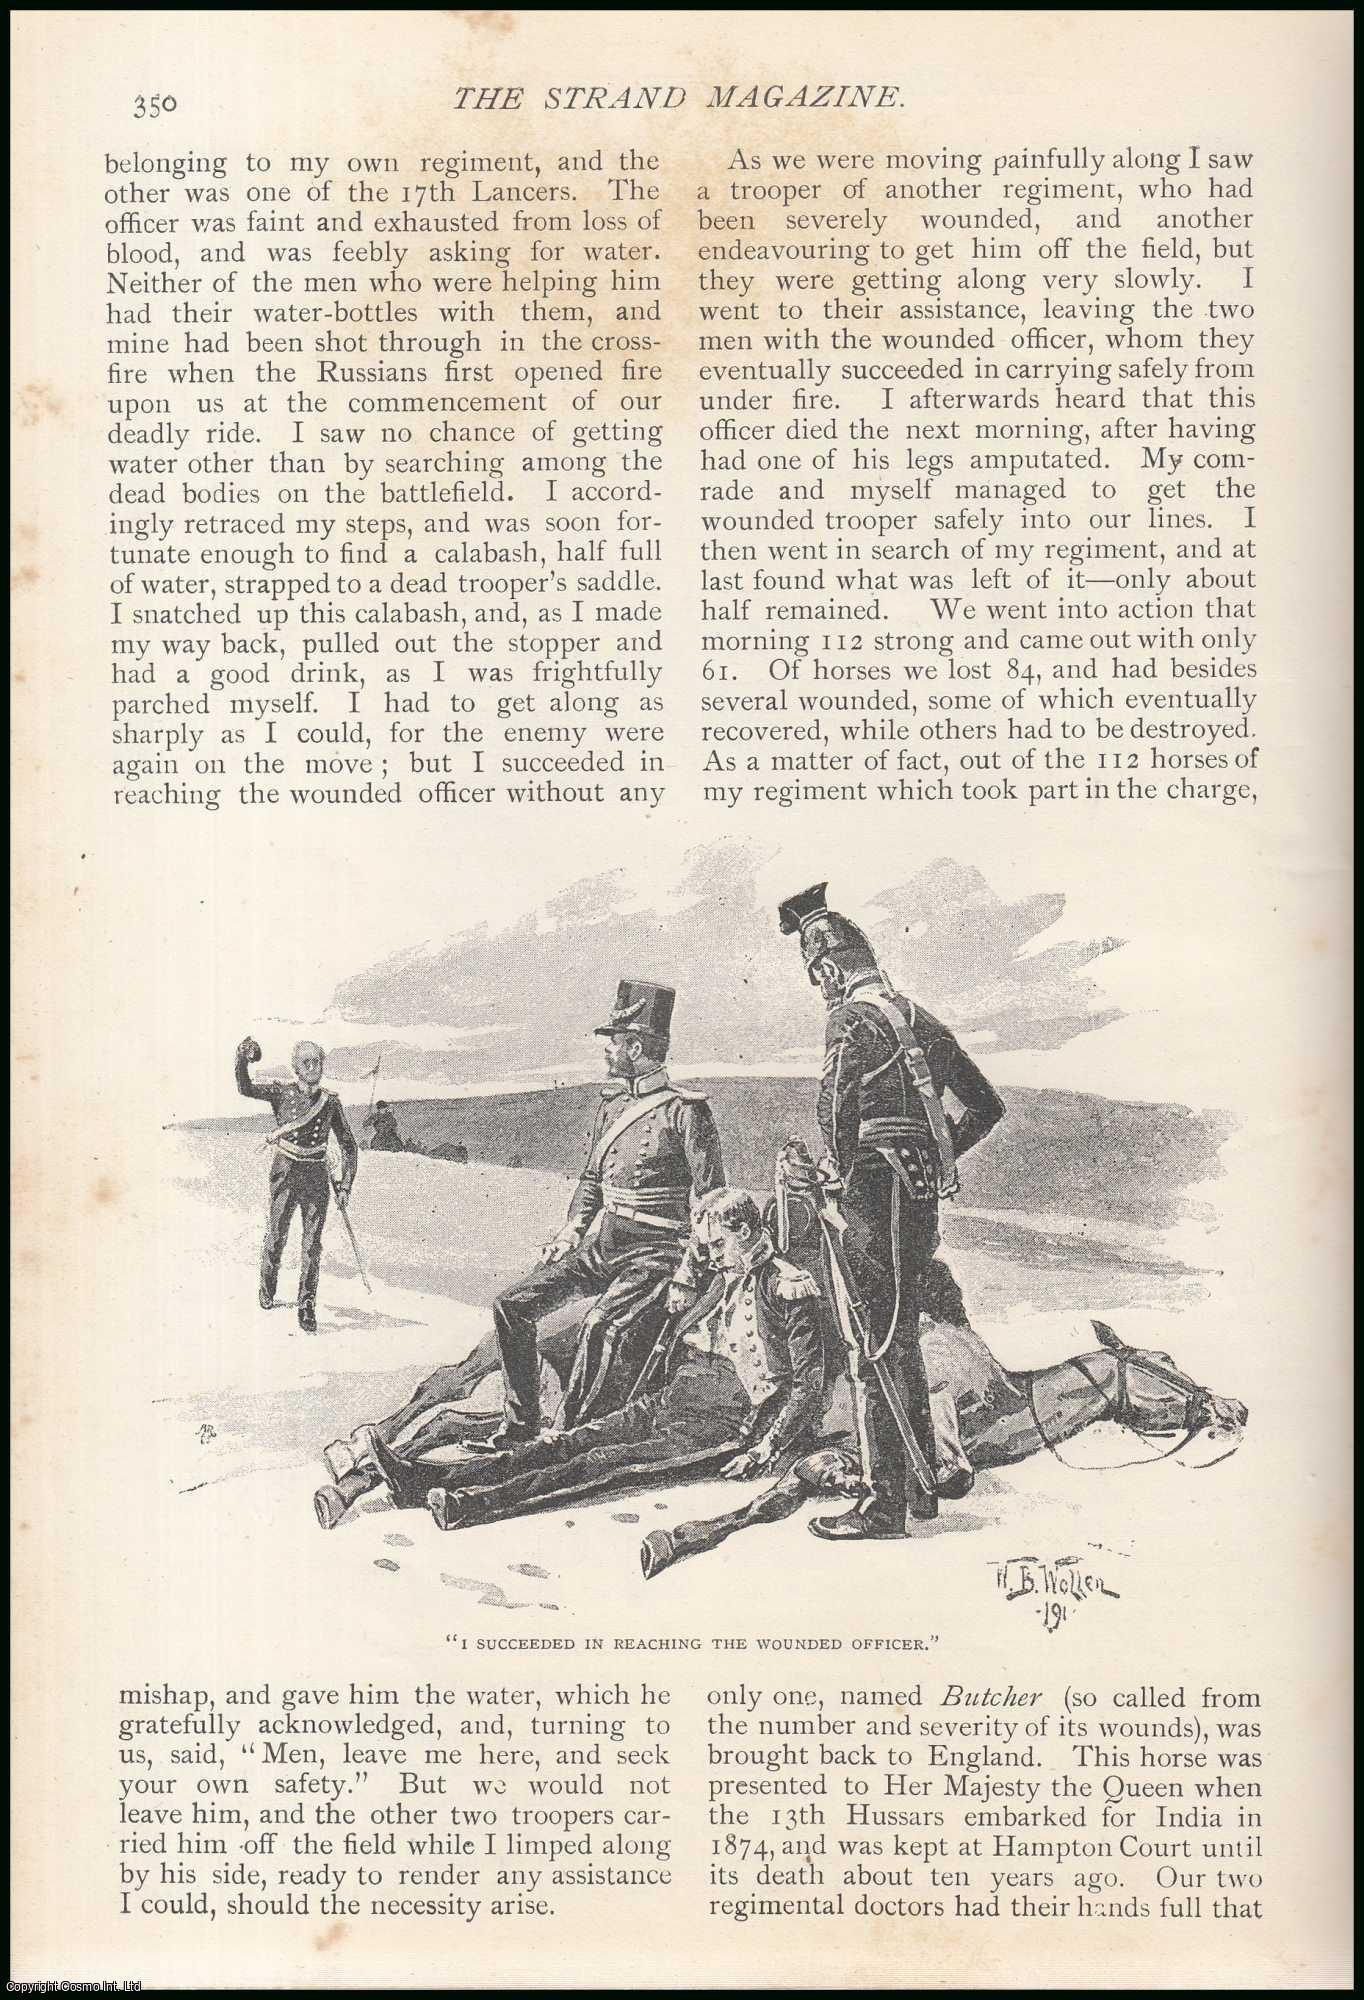 Private James Lamb, Late 13th Hussars (one of the six hundred). - The Charge of The Light Brigade. An uncommon original article from The Strand Magazine, 1891.